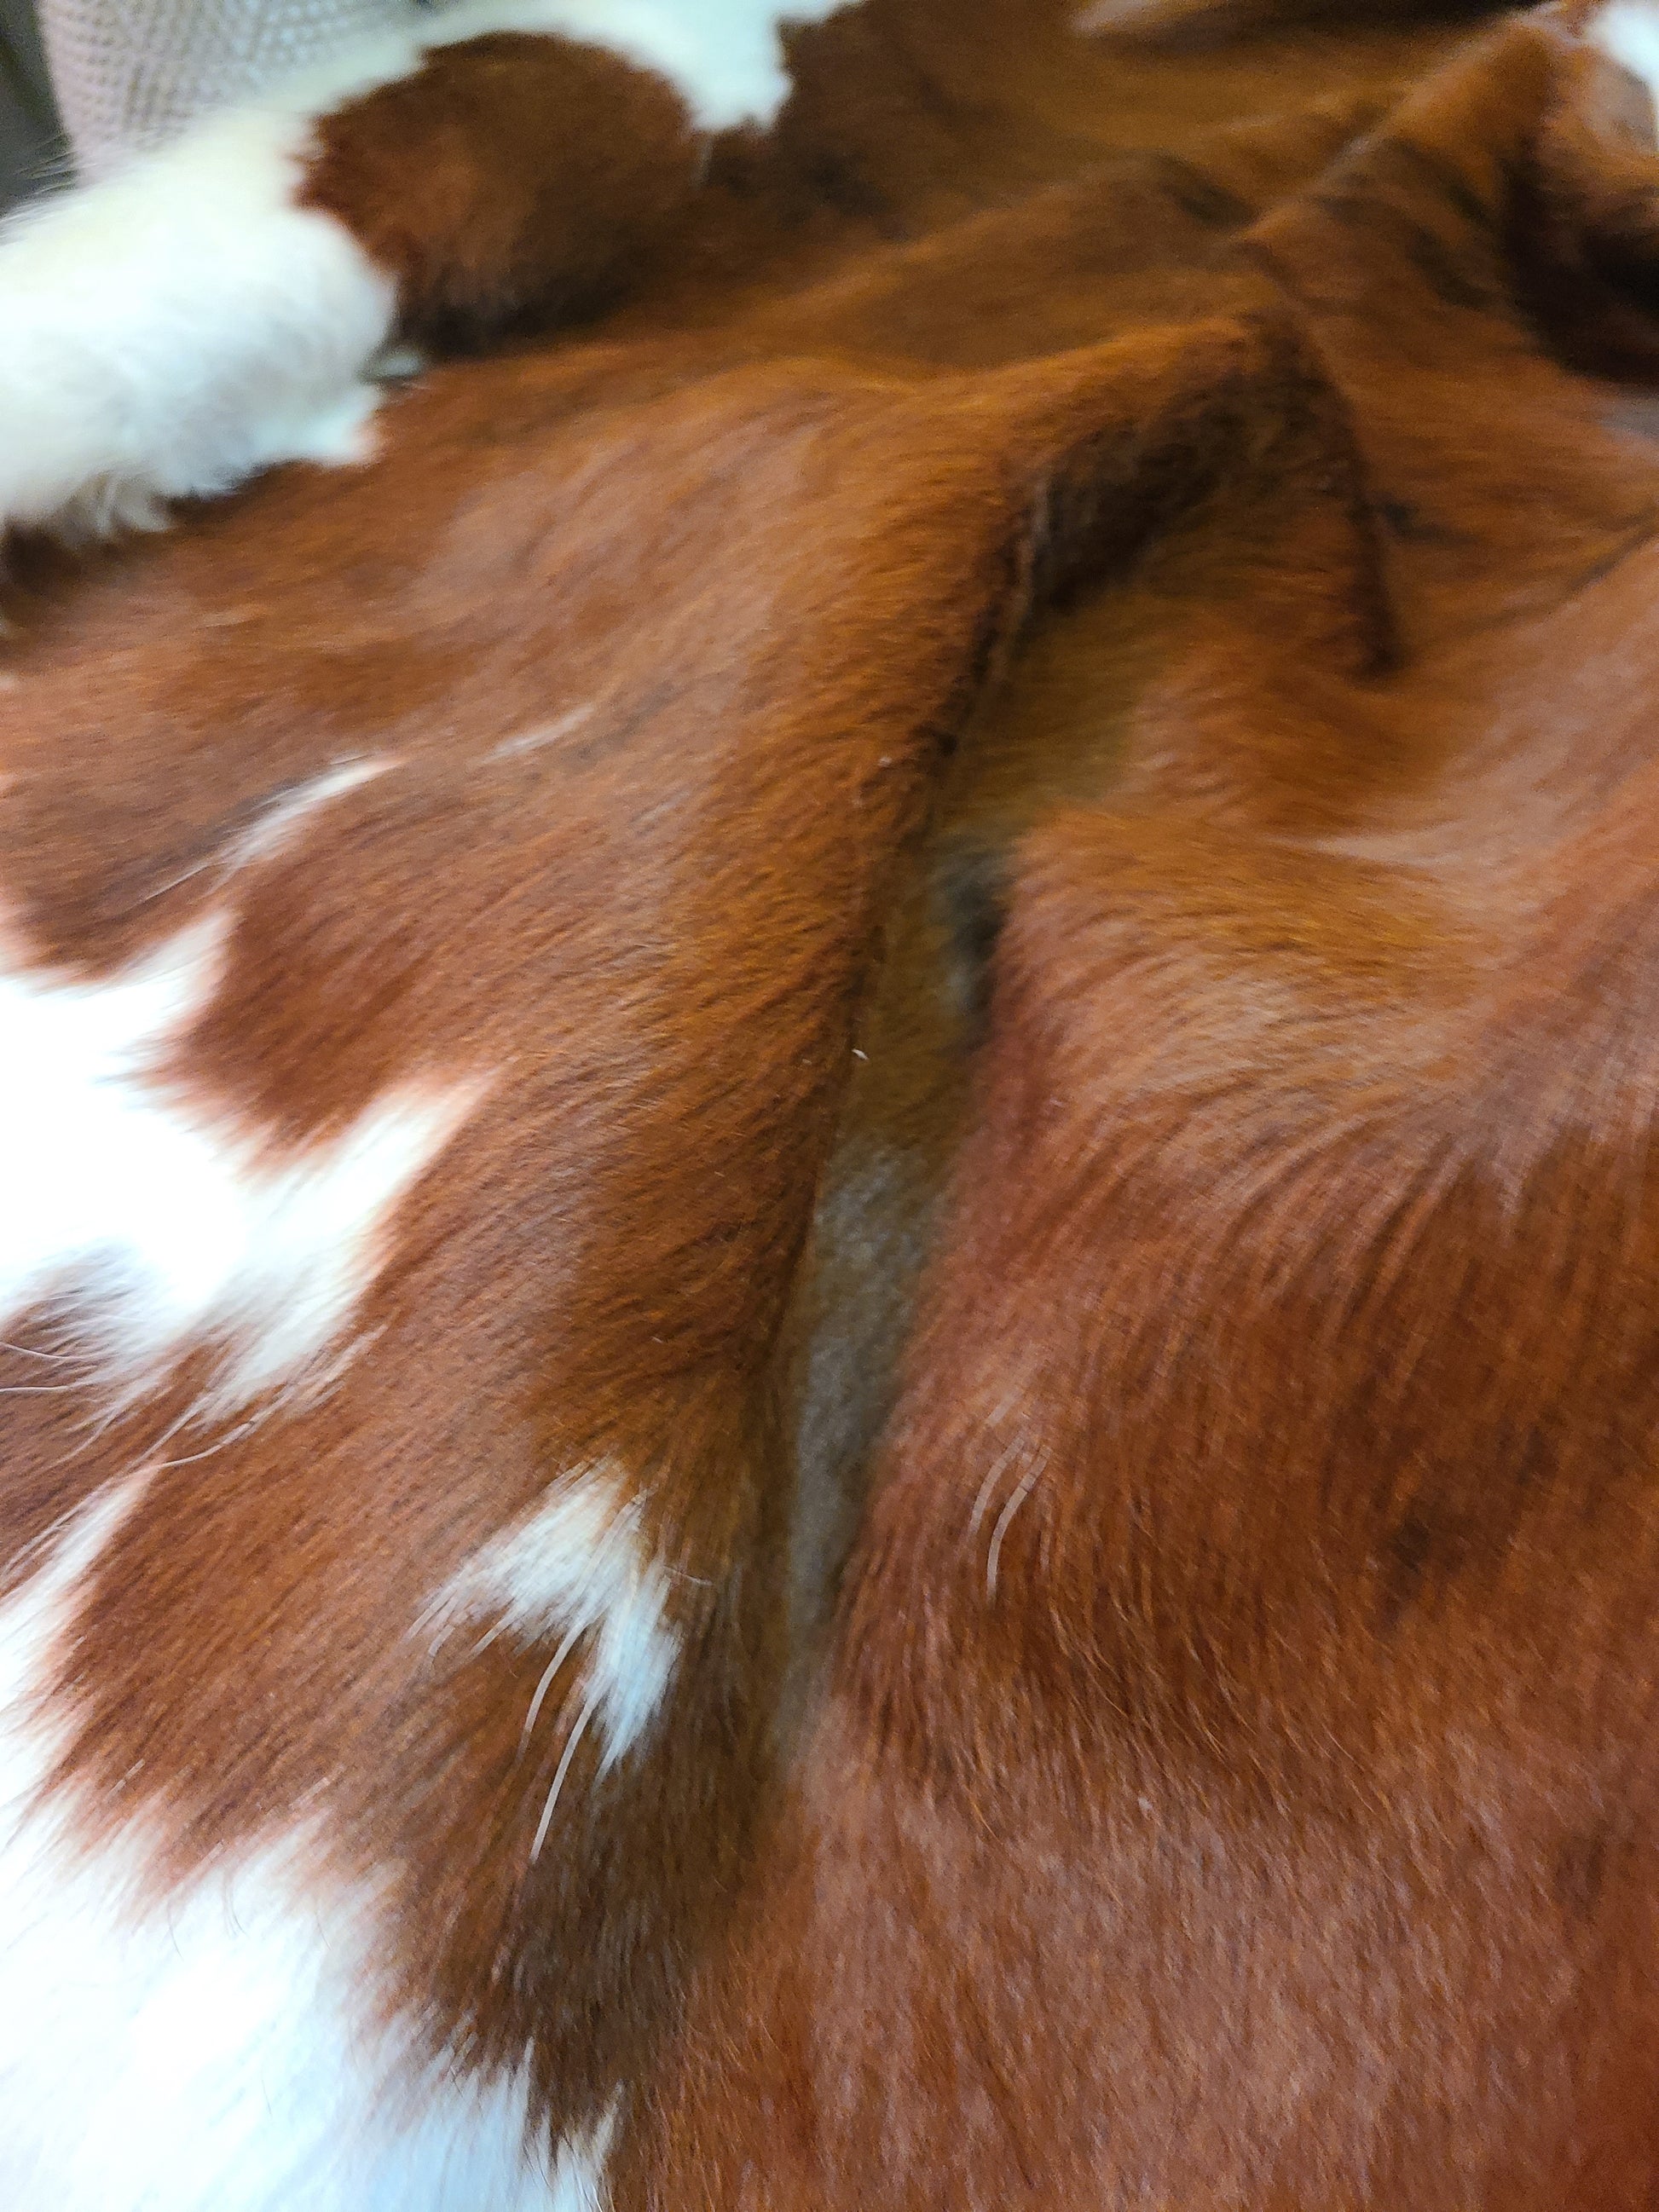 Brazilian Cowhide Rug - Brown & White Spotted - 8 ft x 6 ft-Status Co. Leather Studio